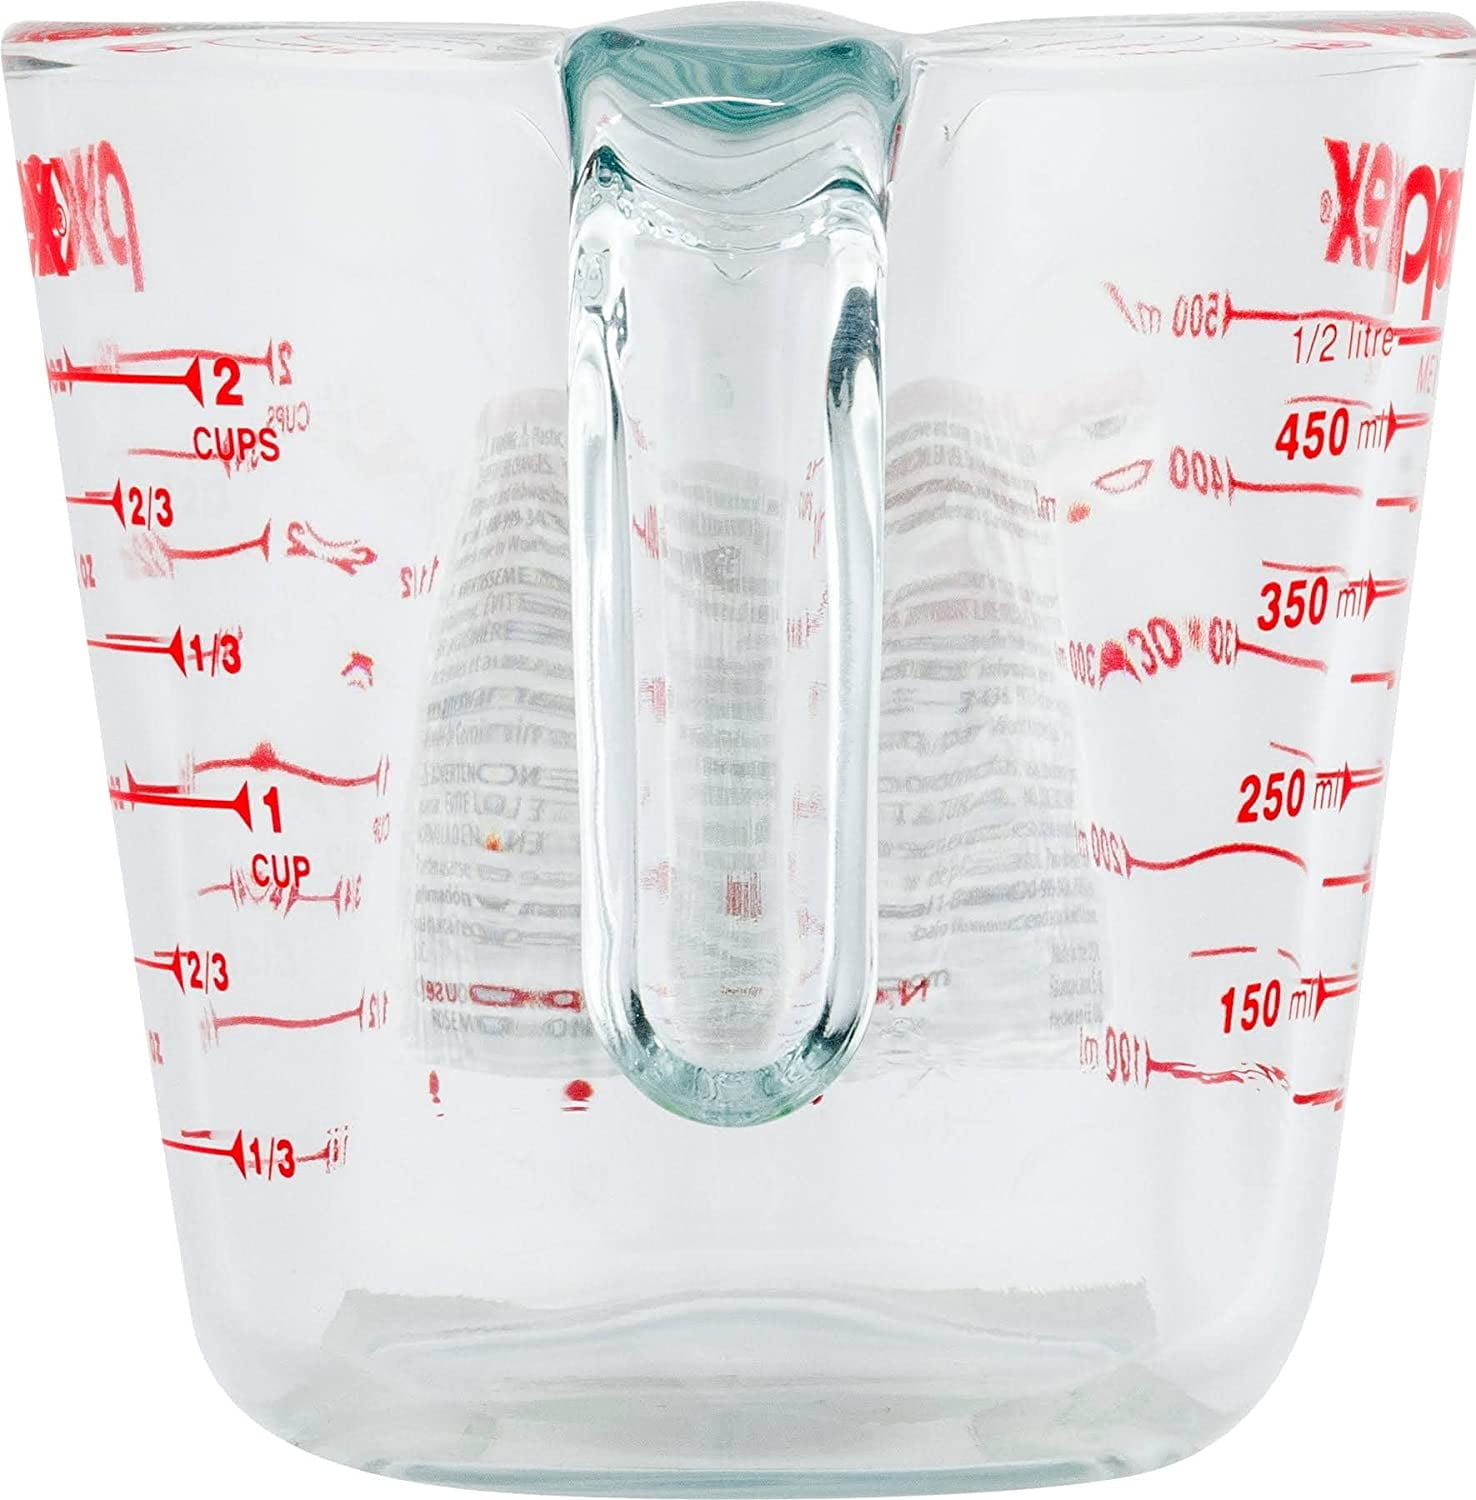 How is a Pyrex Measuring Cup made? - BrandmadeTV 